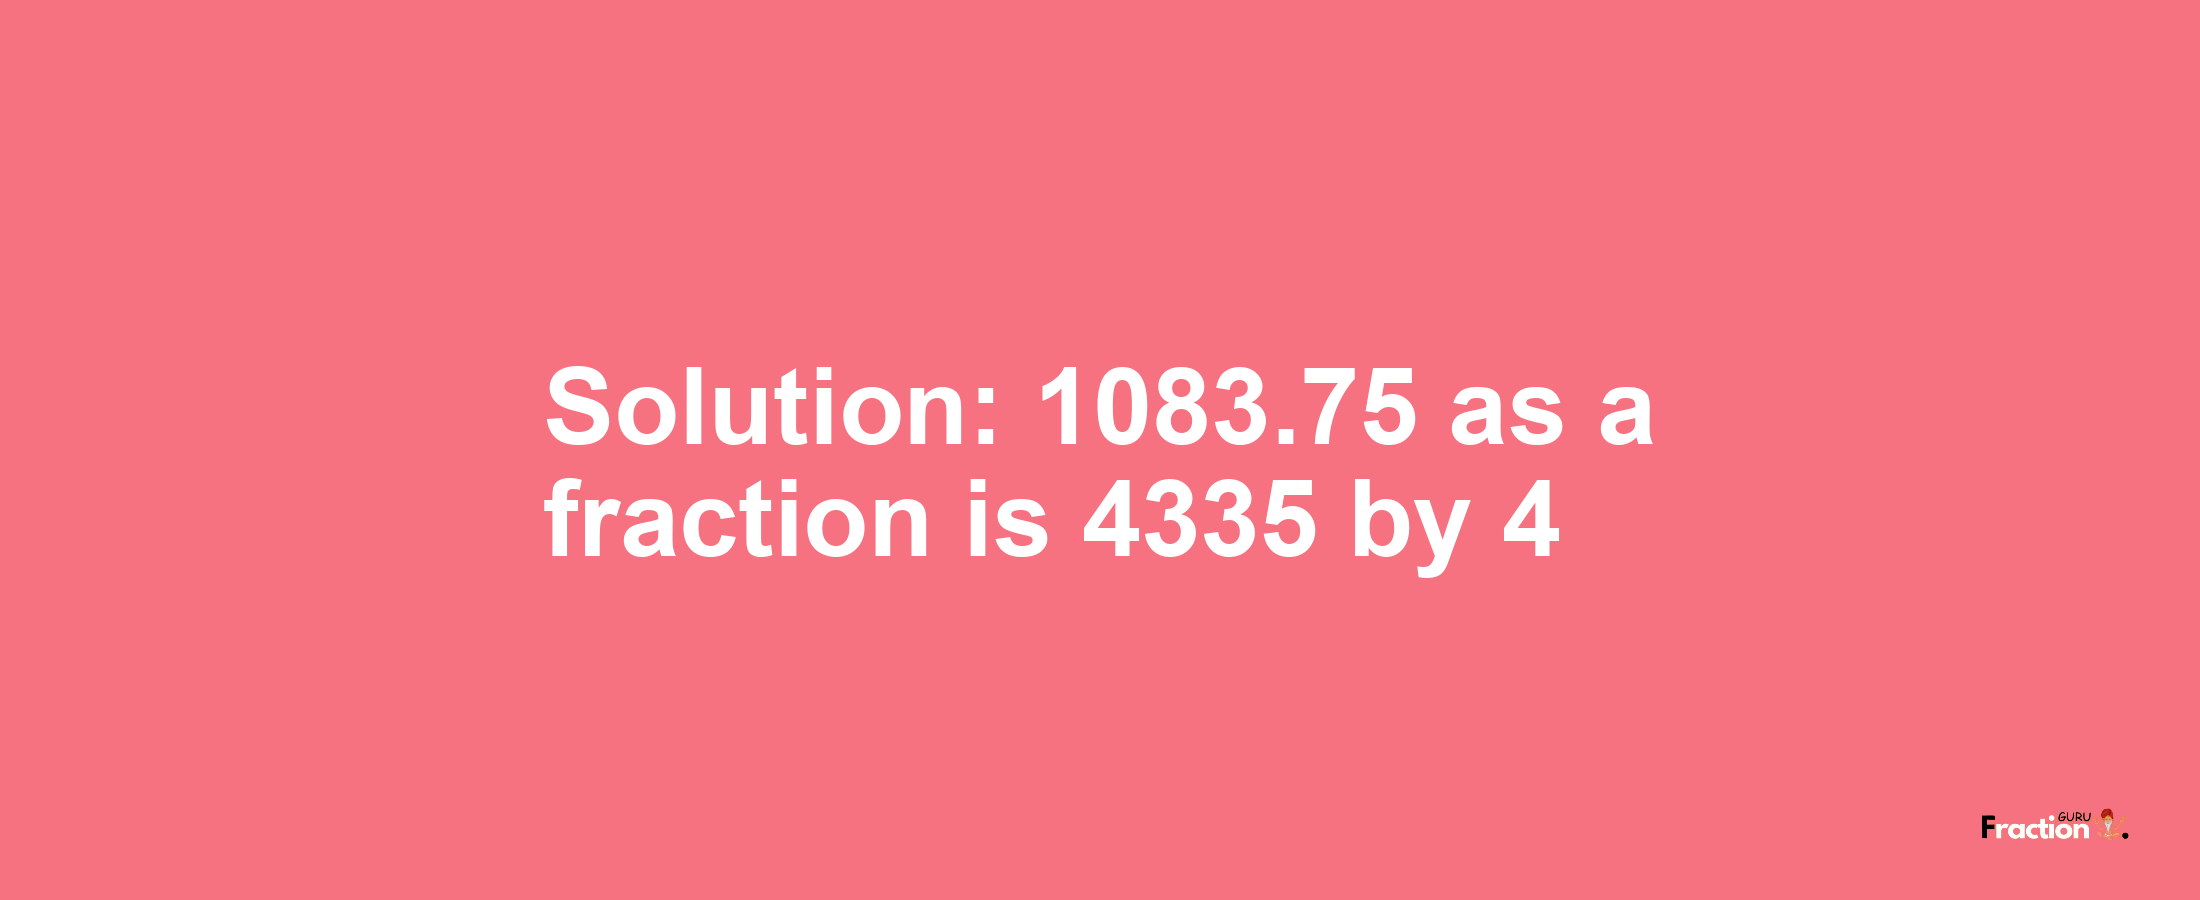 Solution:1083.75 as a fraction is 4335/4